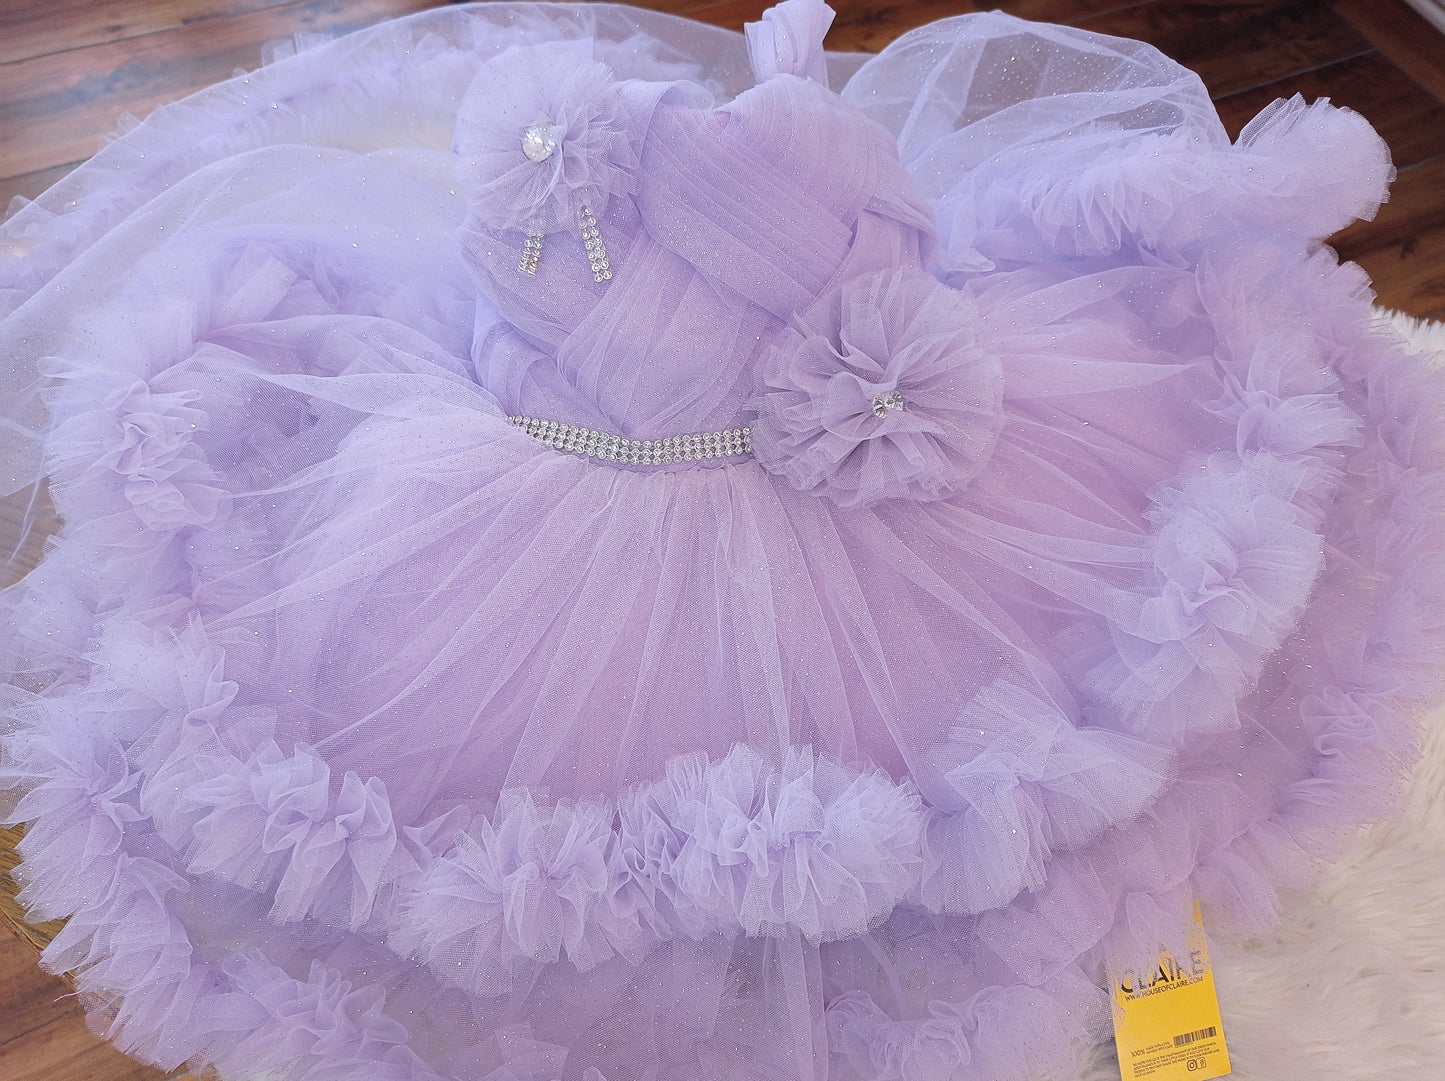 New Arrivals - Lavendar Purple Fluffy Baby Girl Long-trail 1st Birthday Party Wear for Baby girls.